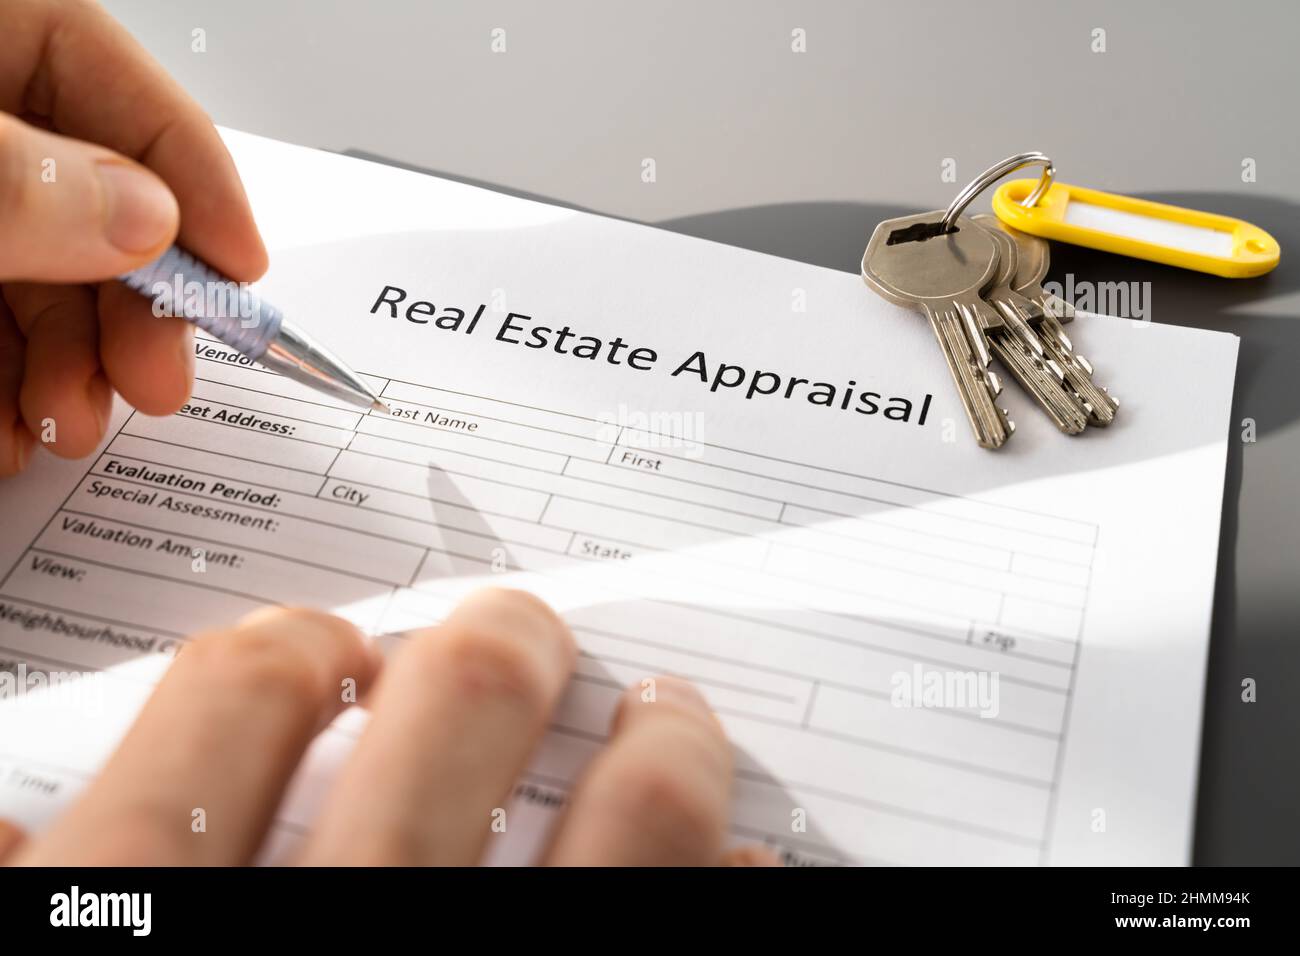 Rental Property Agreement Management. Rent House And Appraisal Stock Photo